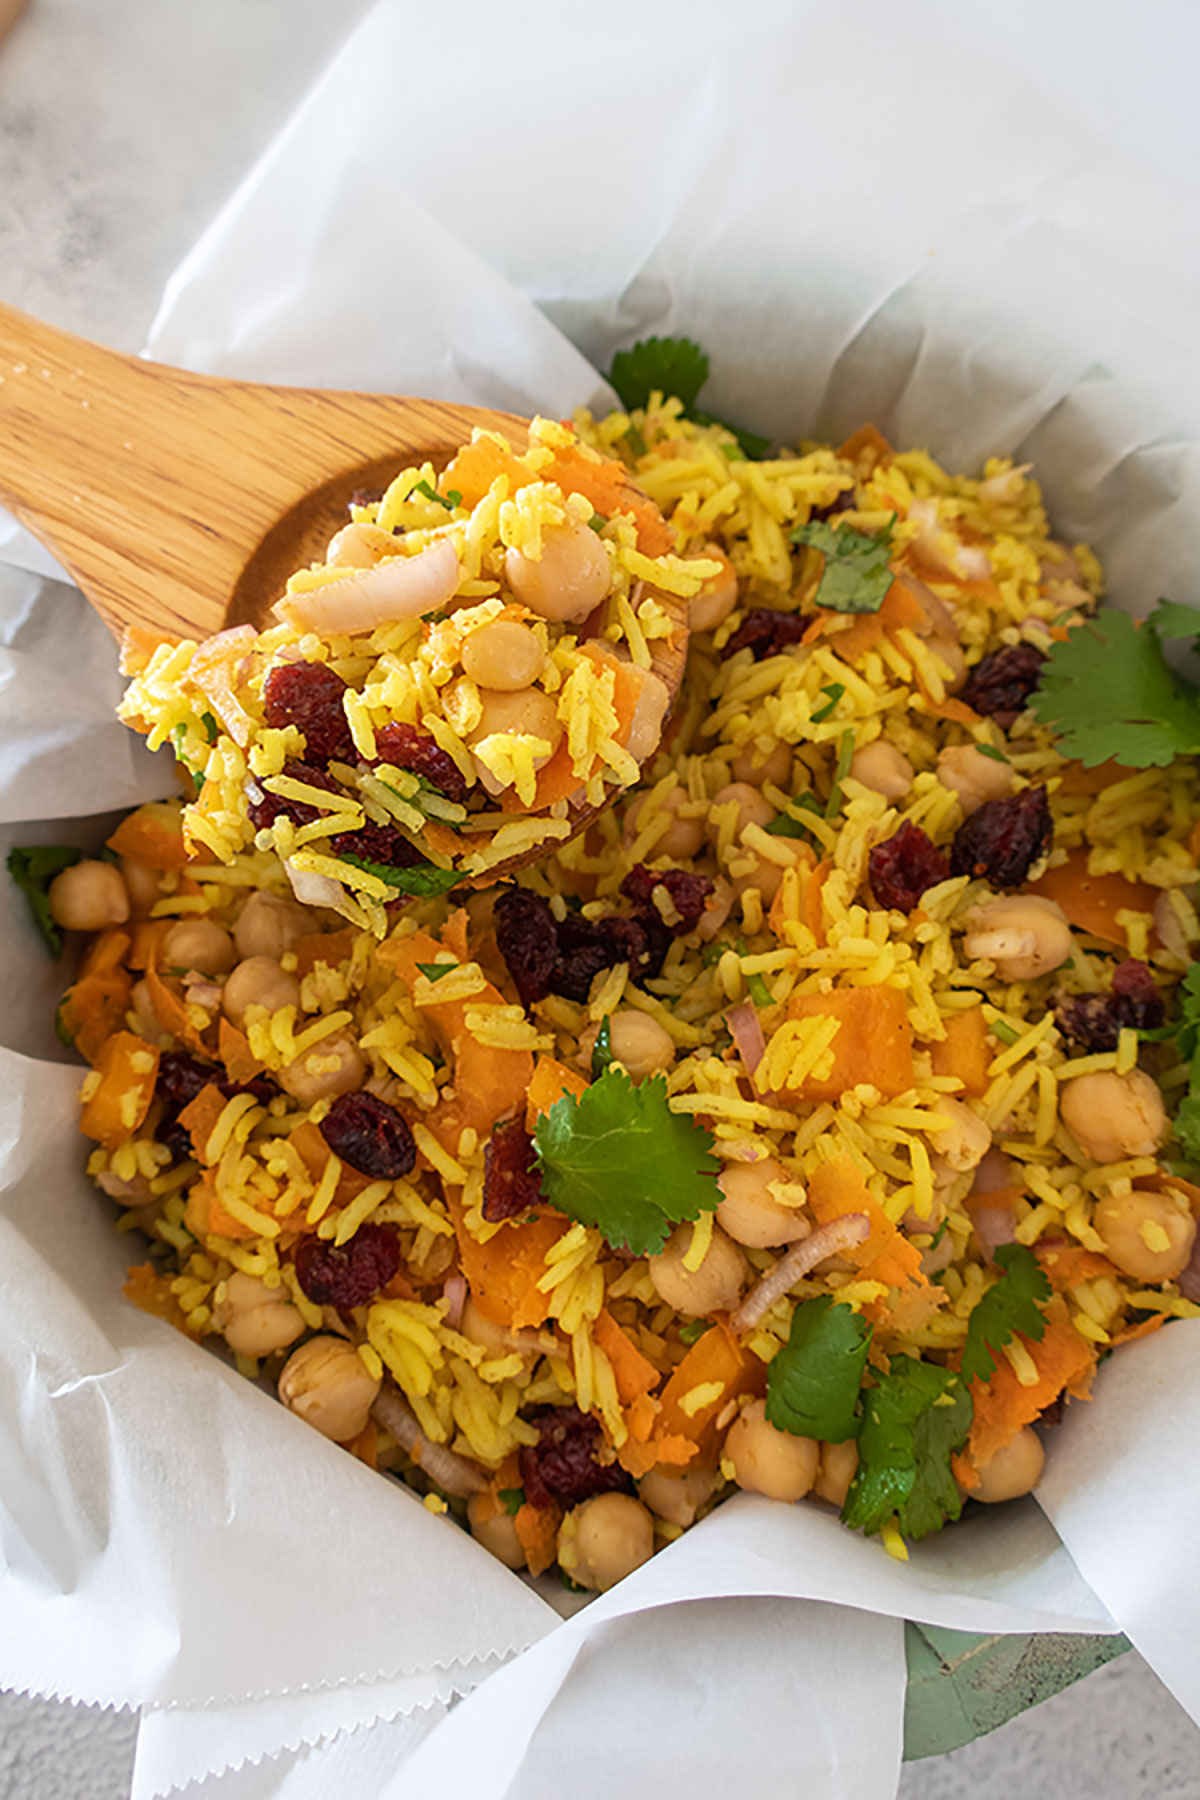 Moroccan rice salad with chickpeas in a bowl